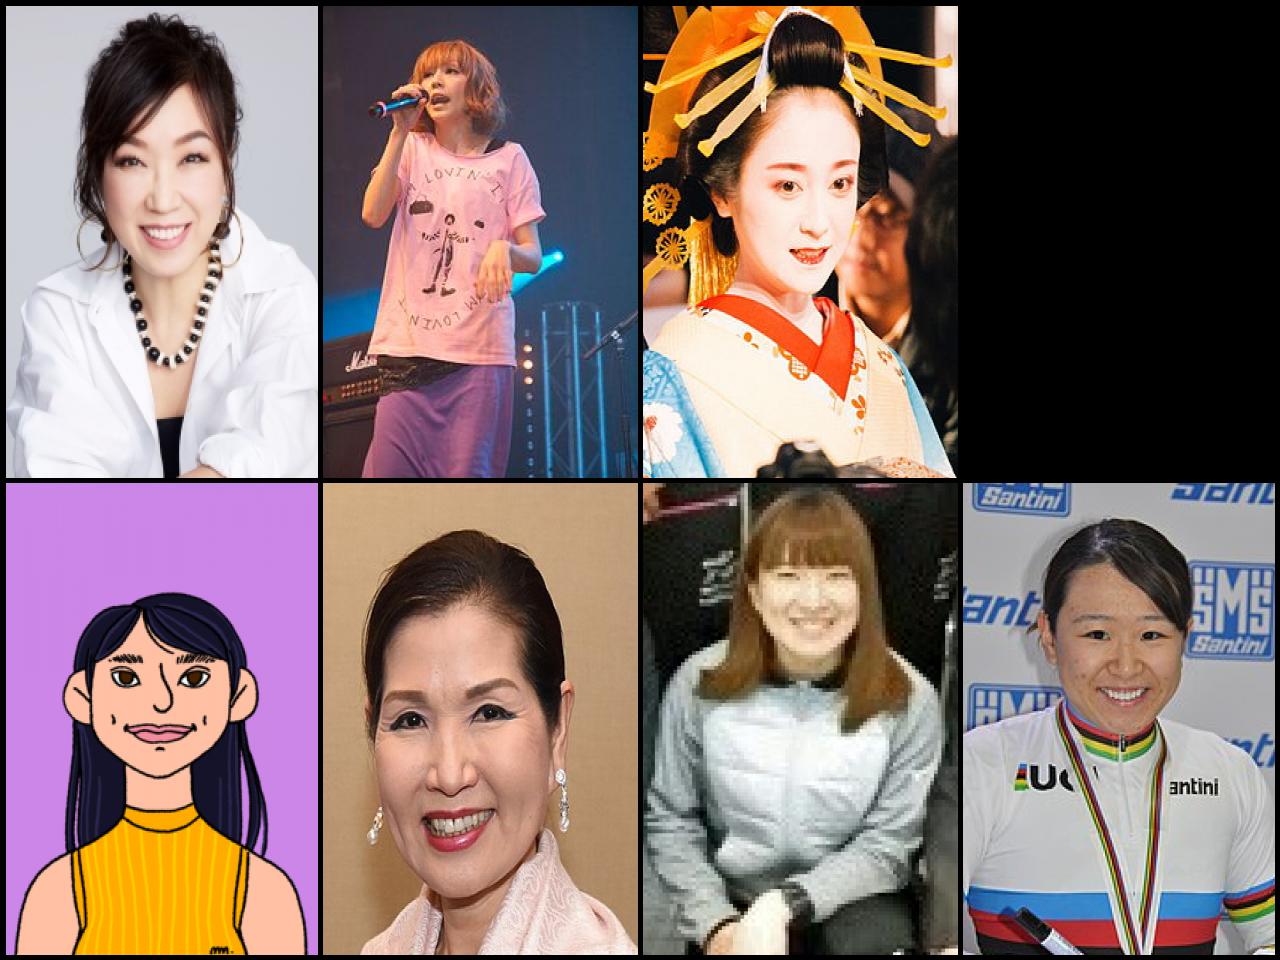 List of Famous people named <b>Yumi</b>